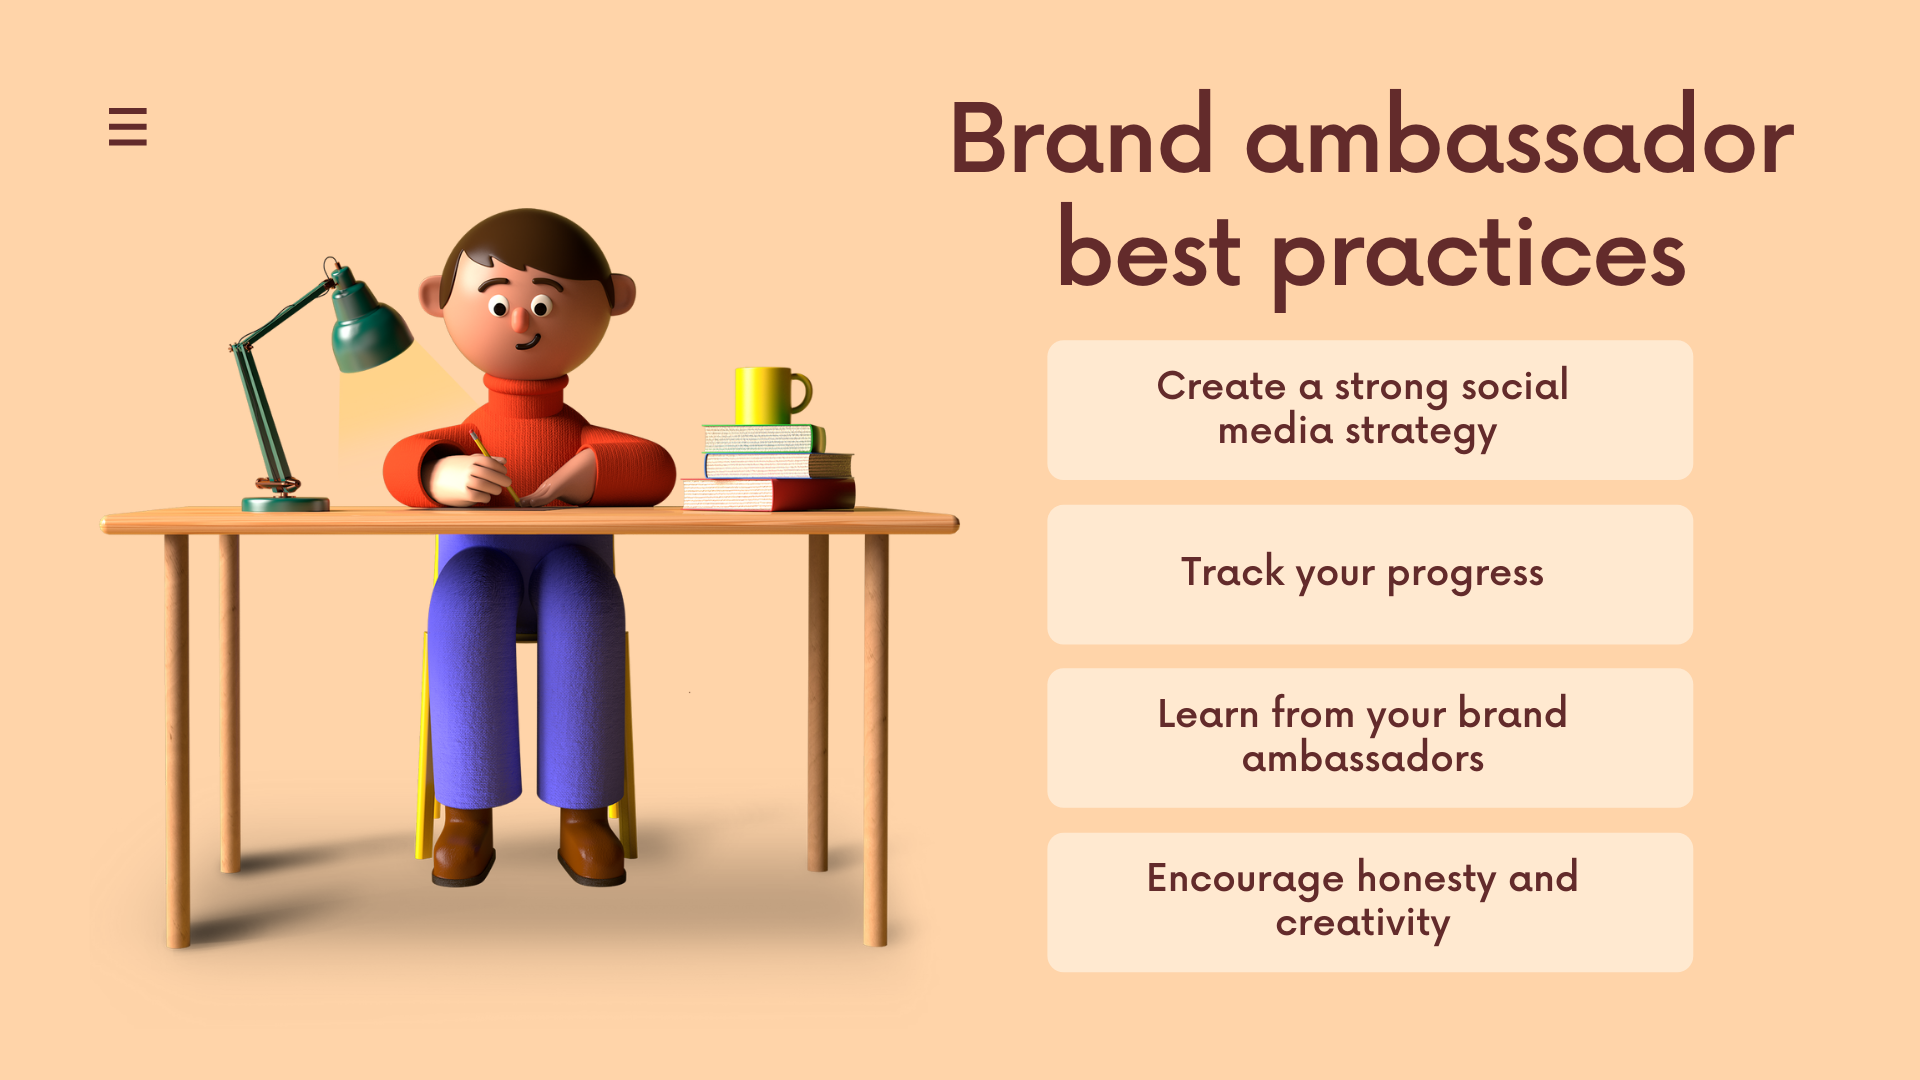 What Are Brand Ambassadors and Why Are They Important? - Business2Community